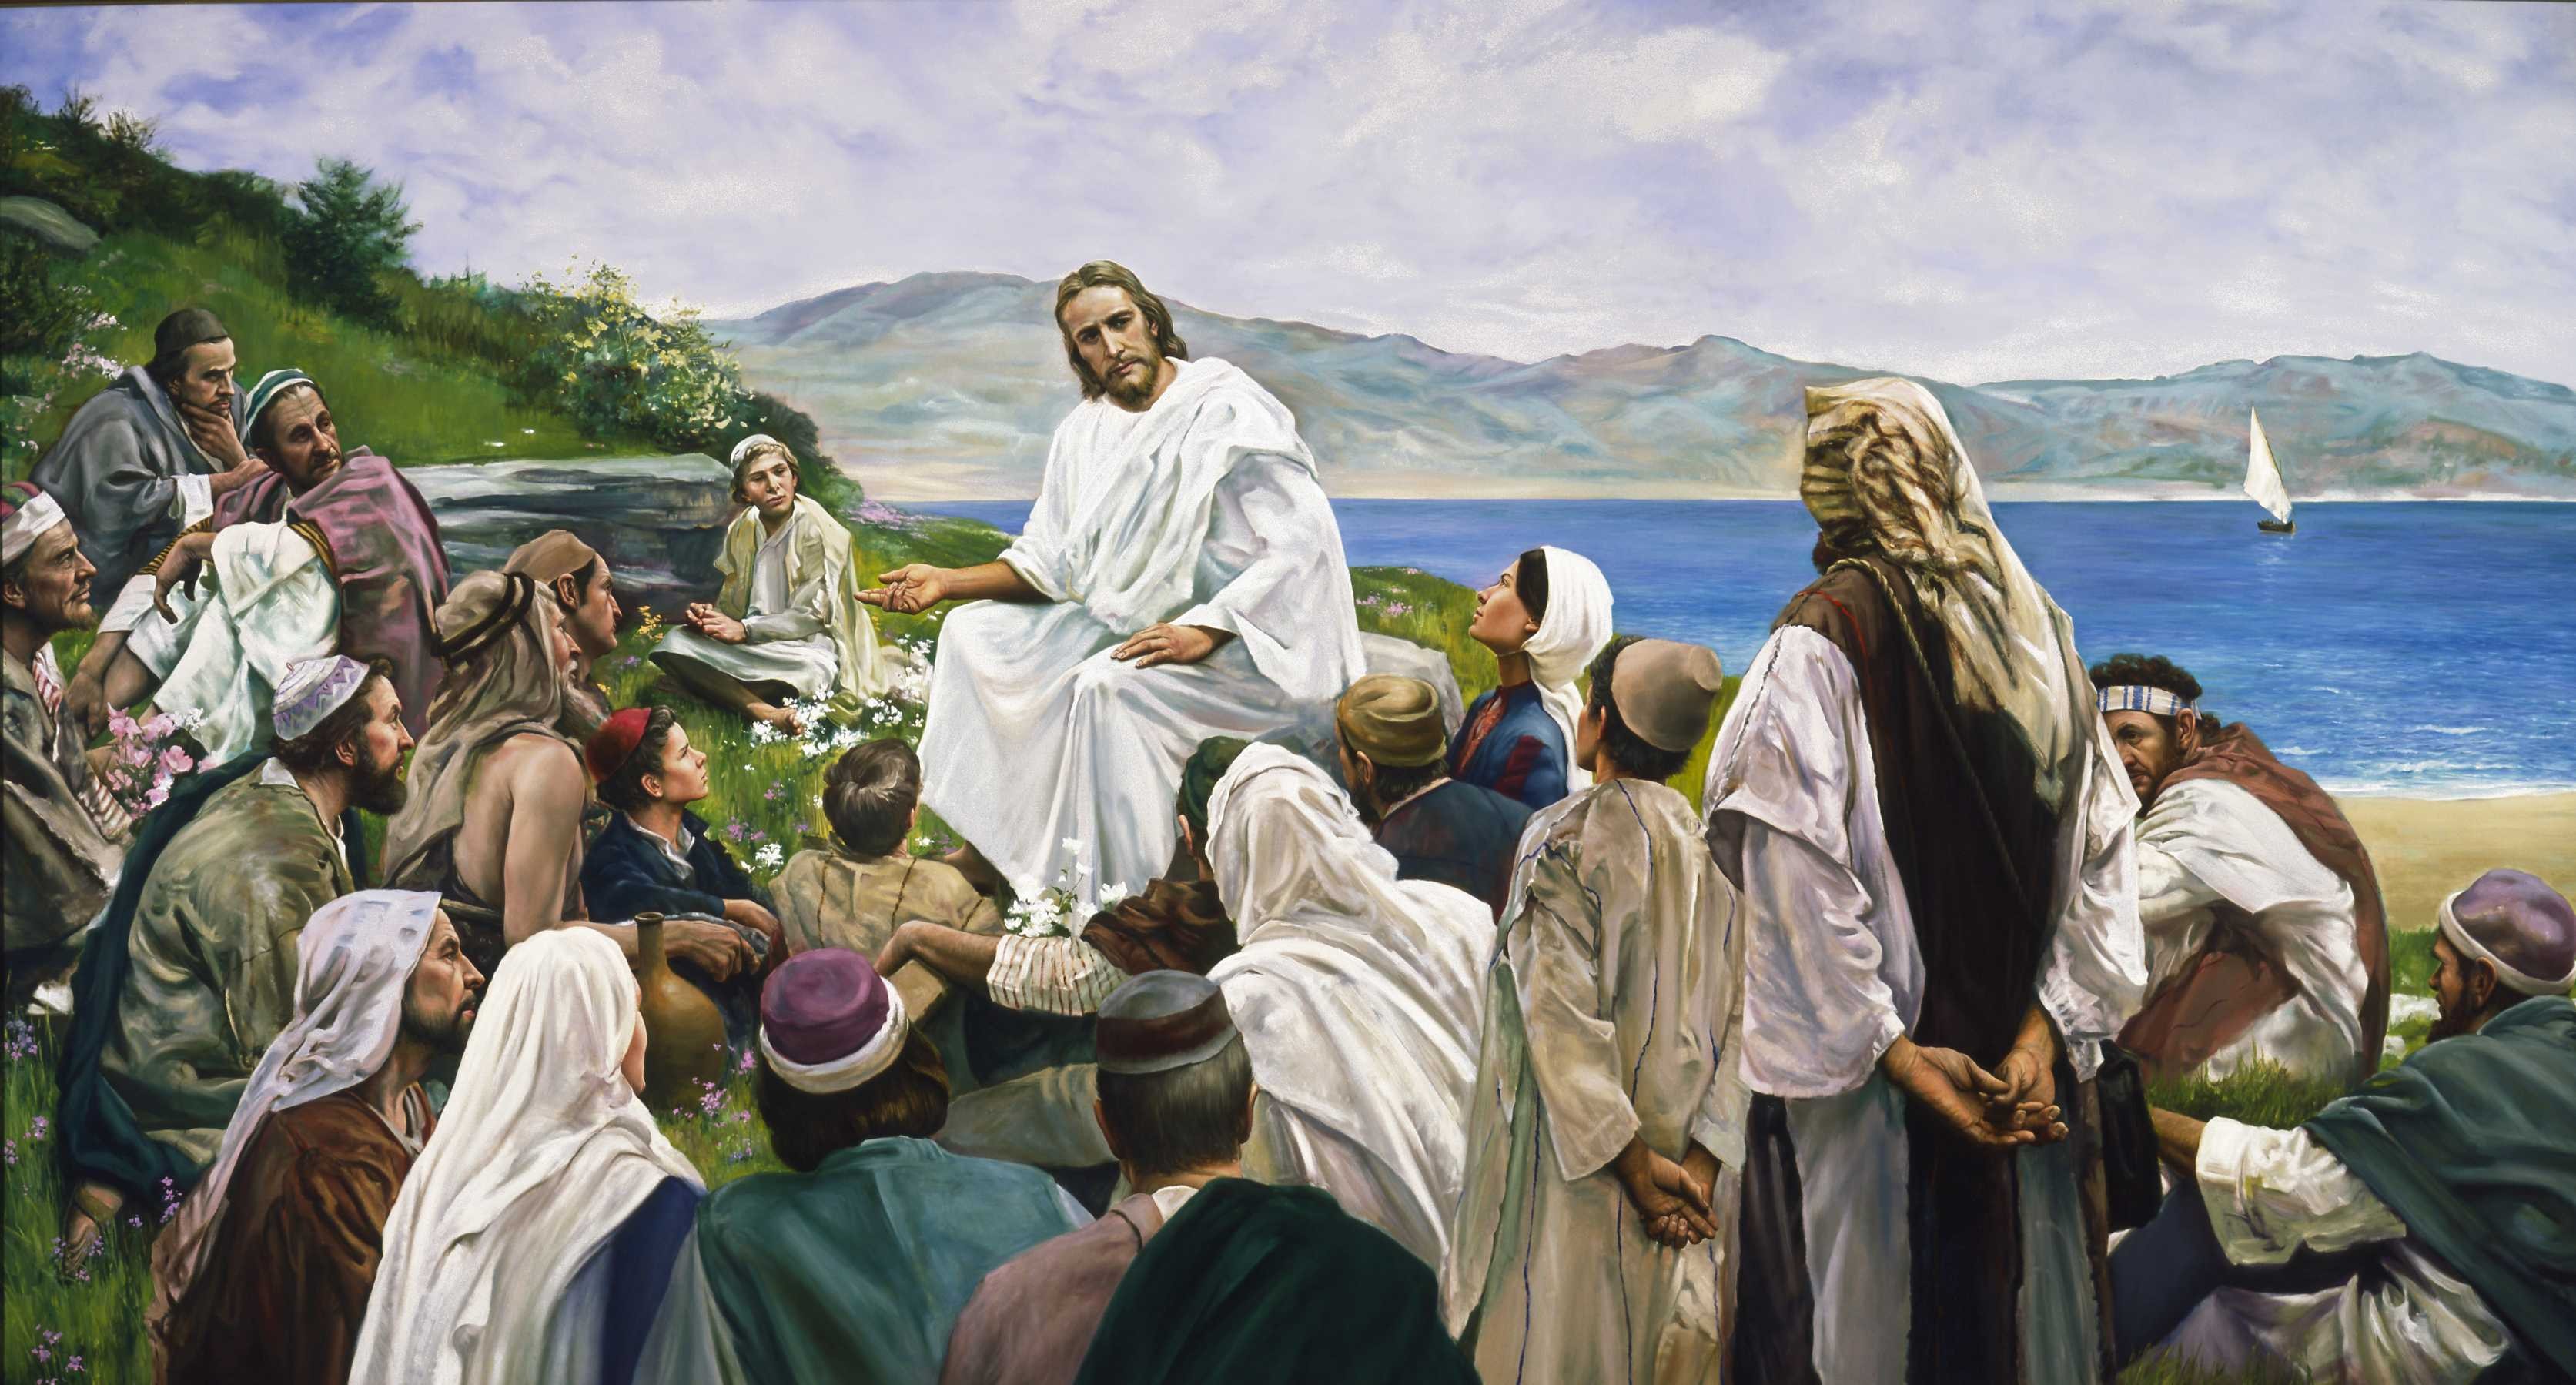 Jesus Christ sitting on a hillside preaching to a crowd of people. Mountains and sea are visible in the background. A reproduction by Grant Romney Clawson of the original "Sermon on the Mount" by Harry Anderson.